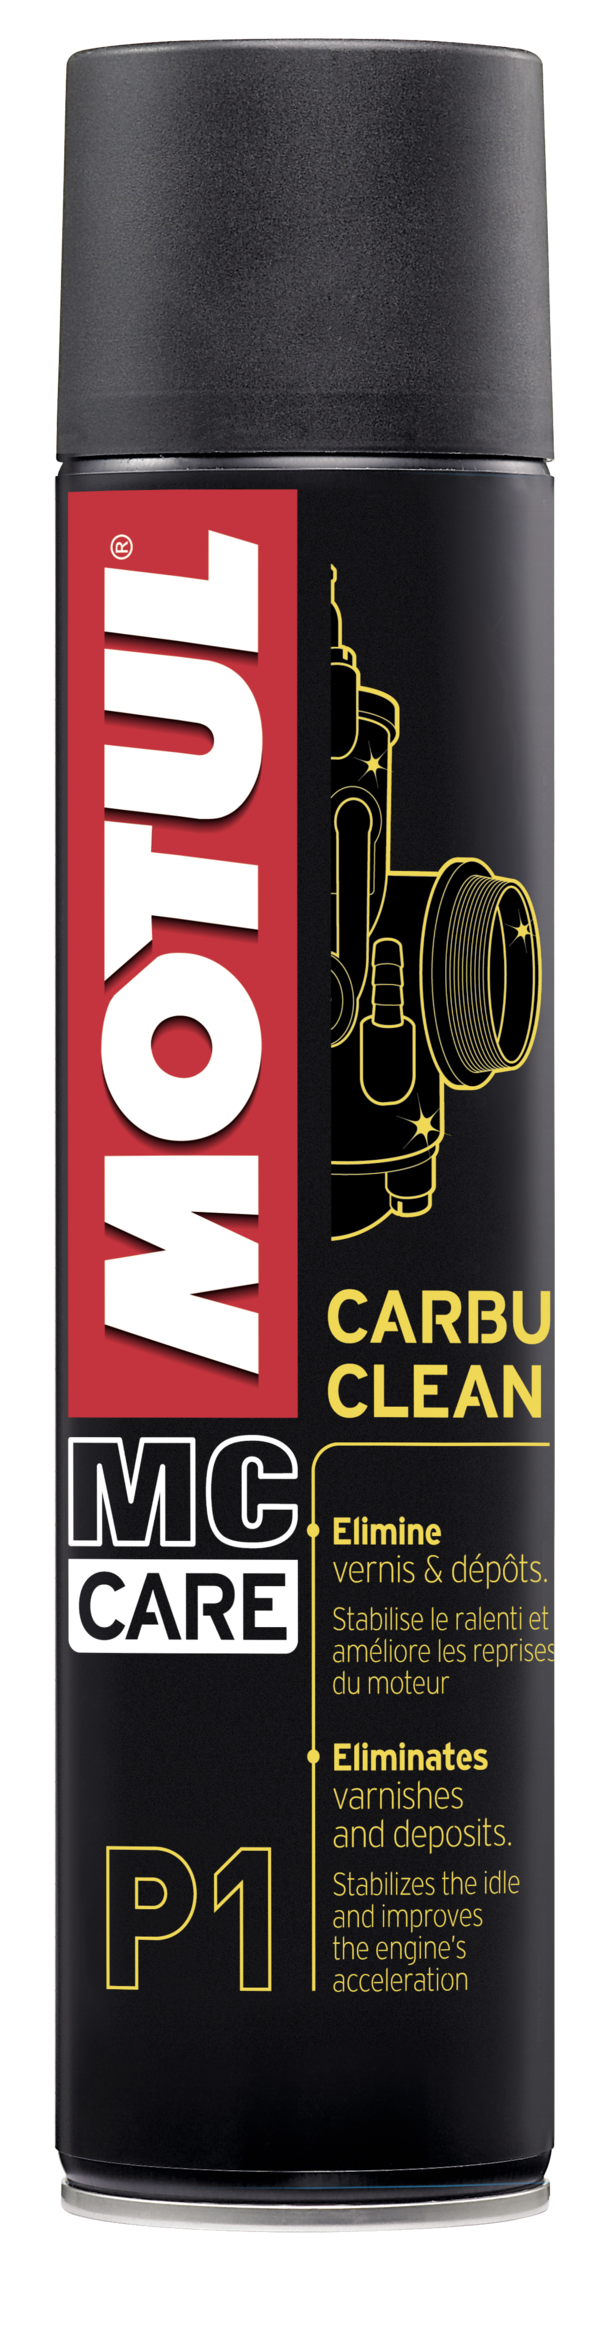 Motorcycle Carburetor Cleaner P1 CARBU CLEAN 0.4L by - Removes Deposits - Picture 1 of 1